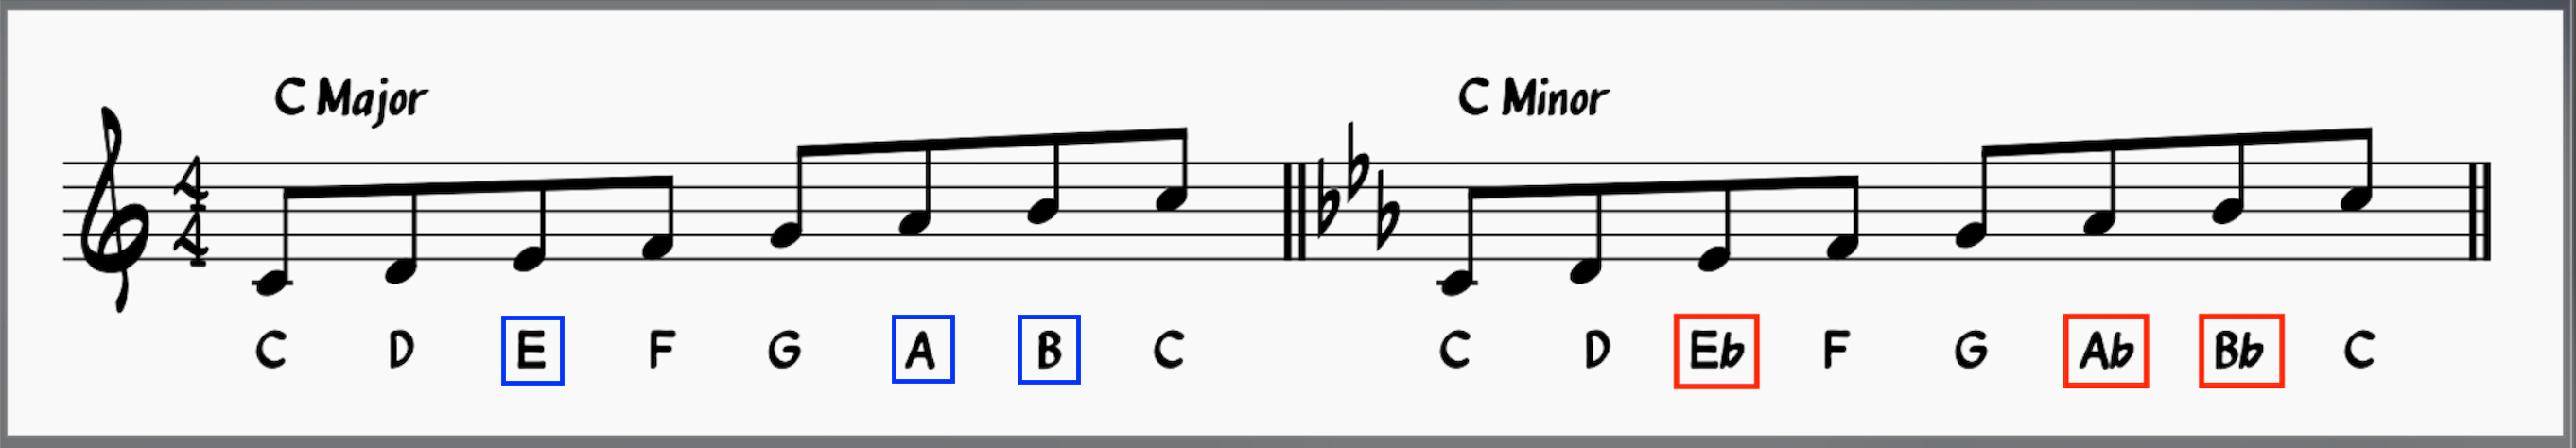 C major compared to it's parallel minor, C minor